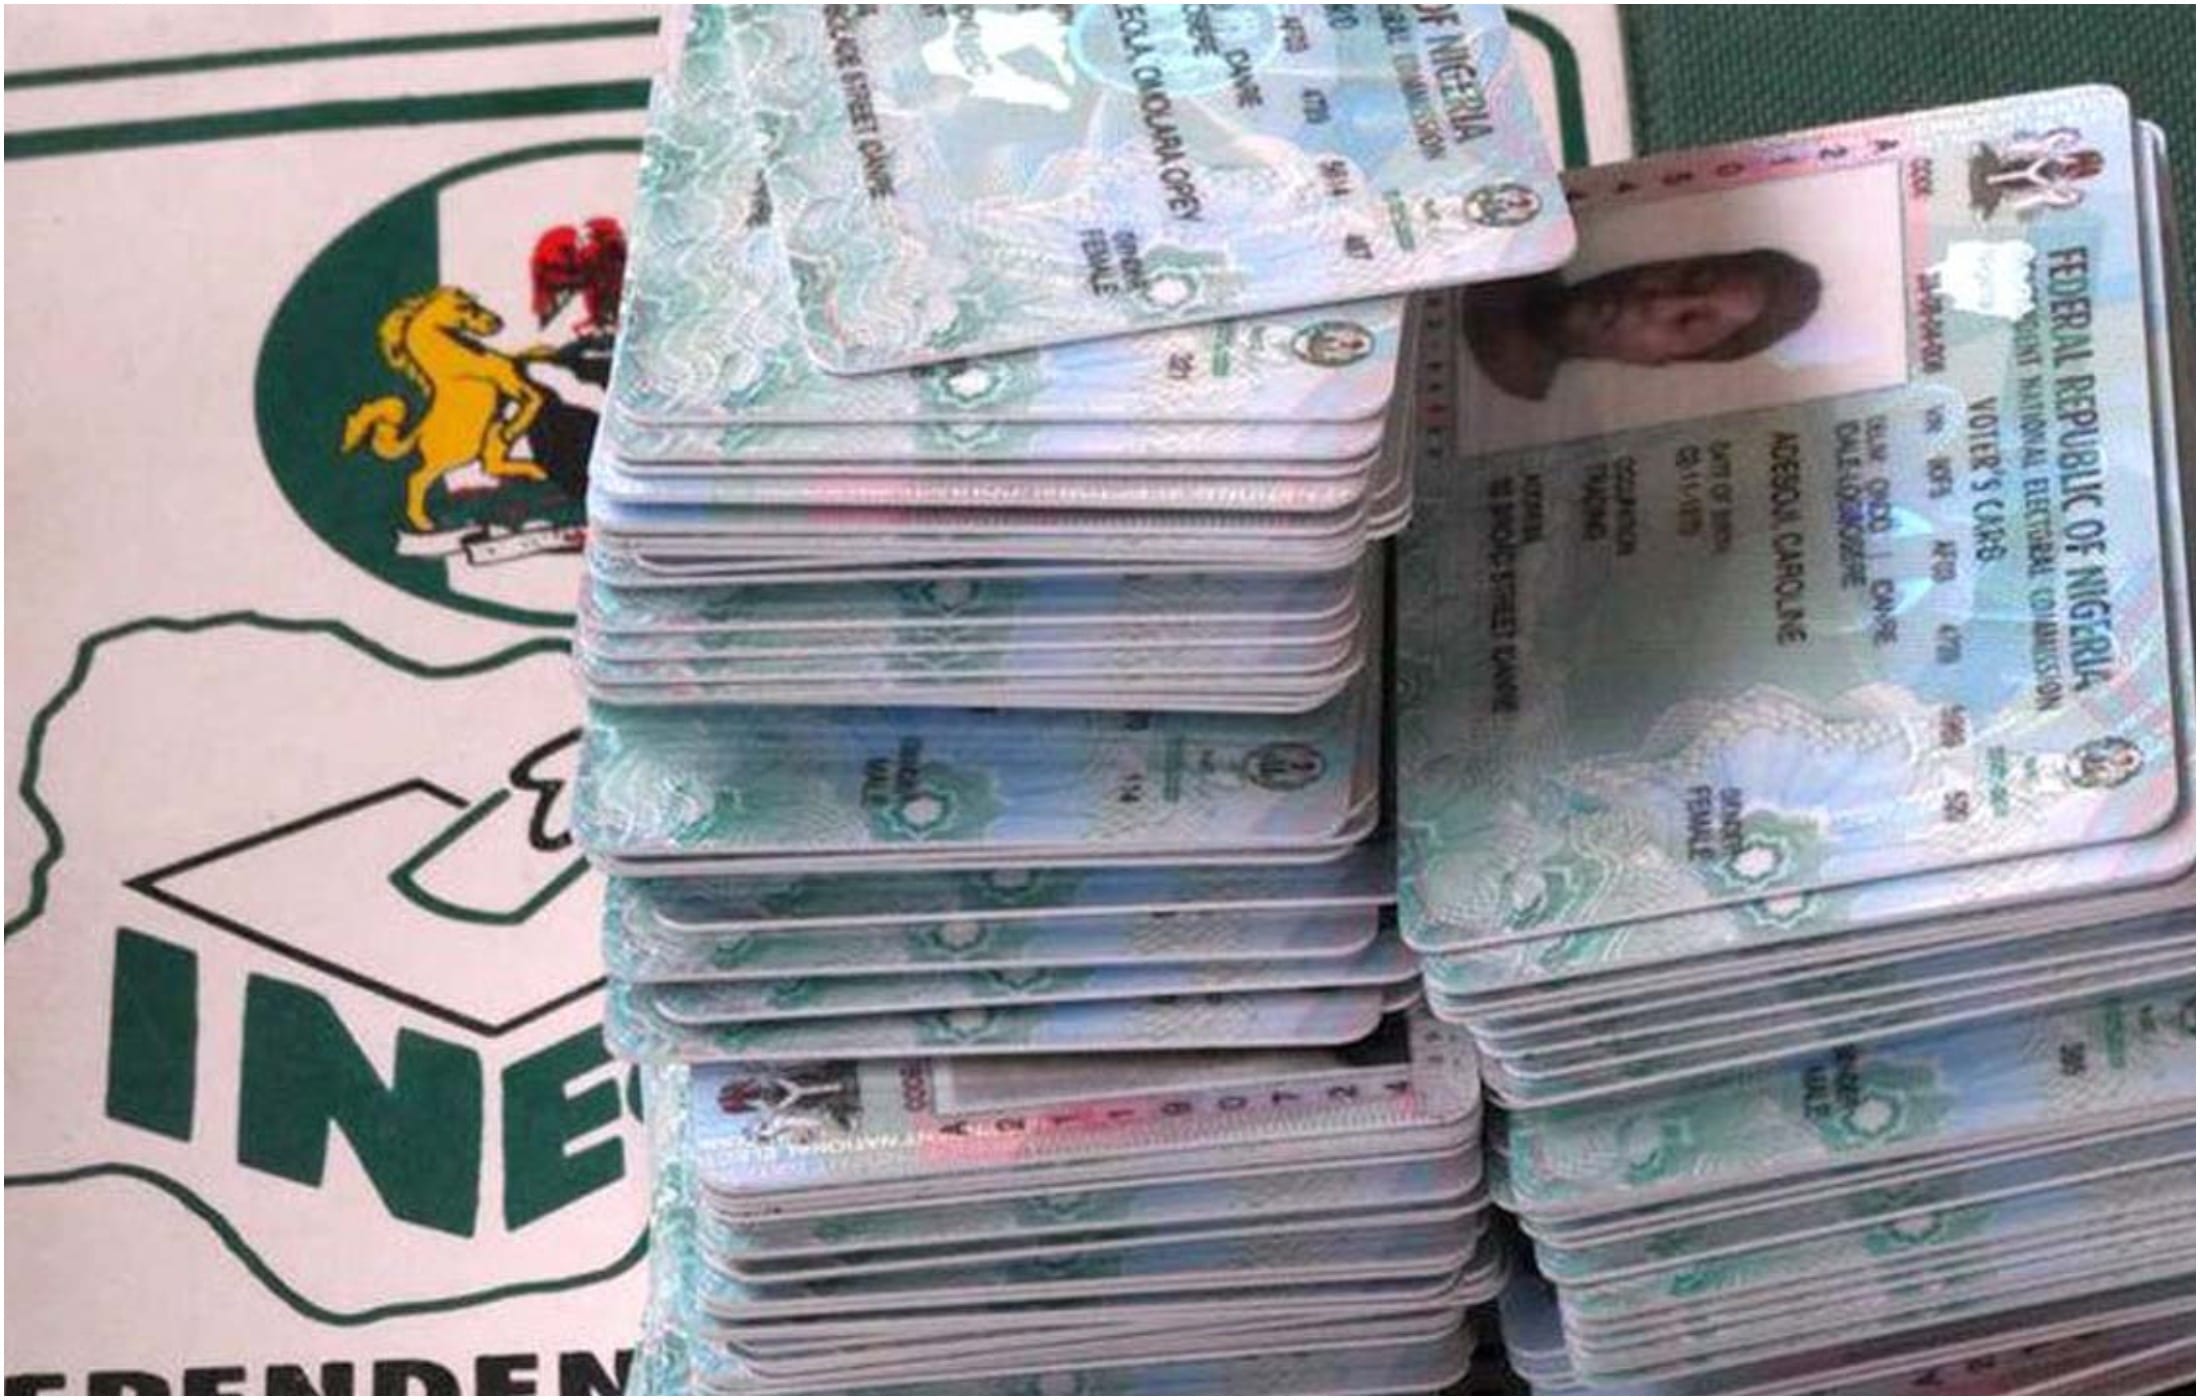 Over 386,000 PVCs awaiting collection in Ondo State – INEC